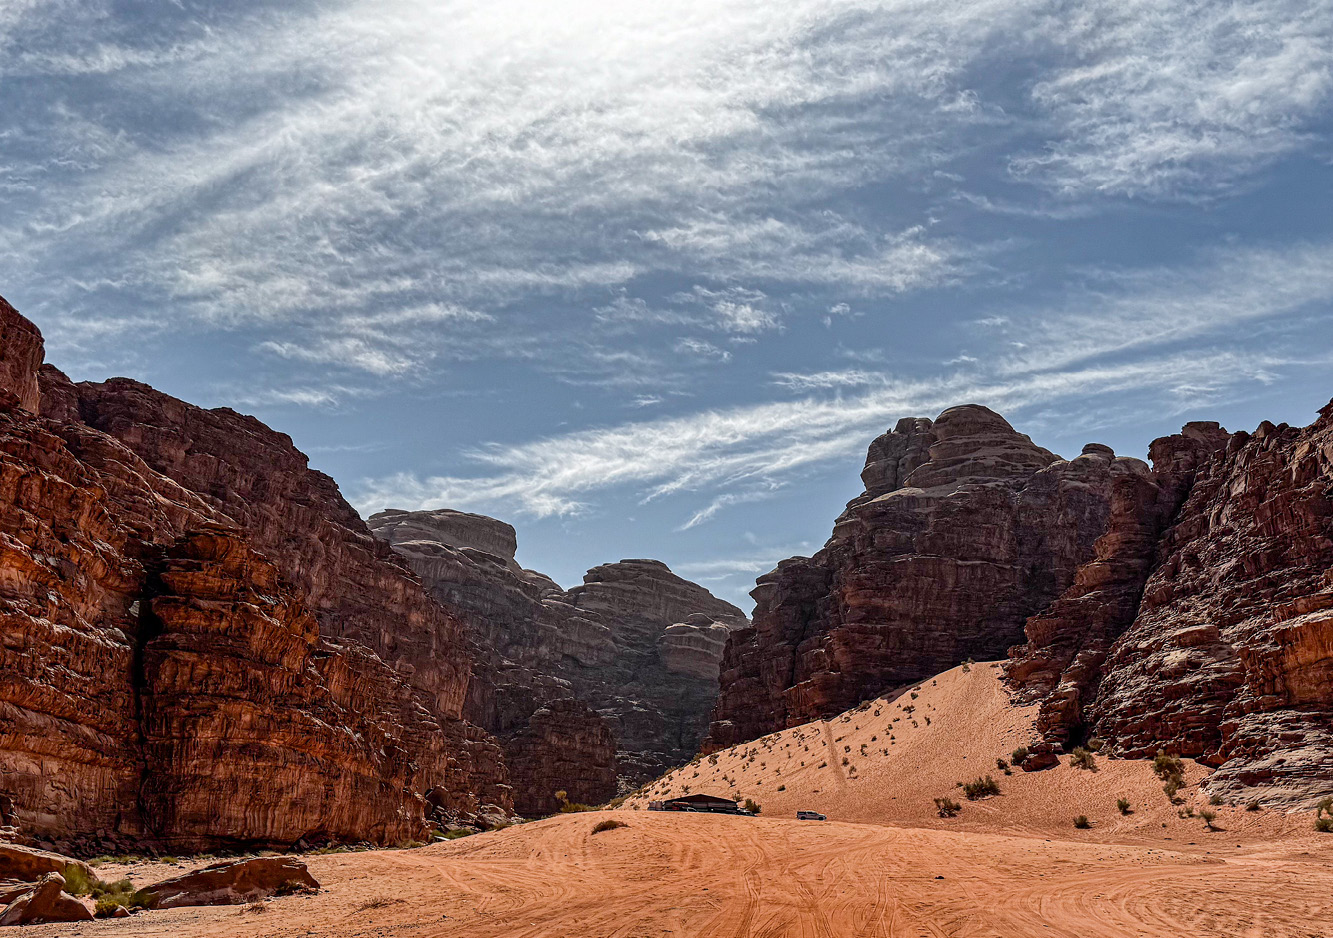 Stark landscape and vast desert of southern Jordan’s Wadi Rum Protected Area swallows tire tracks of local Bedouins who tour visitors staying in campsites tucked away among the sandstone and granite hills.